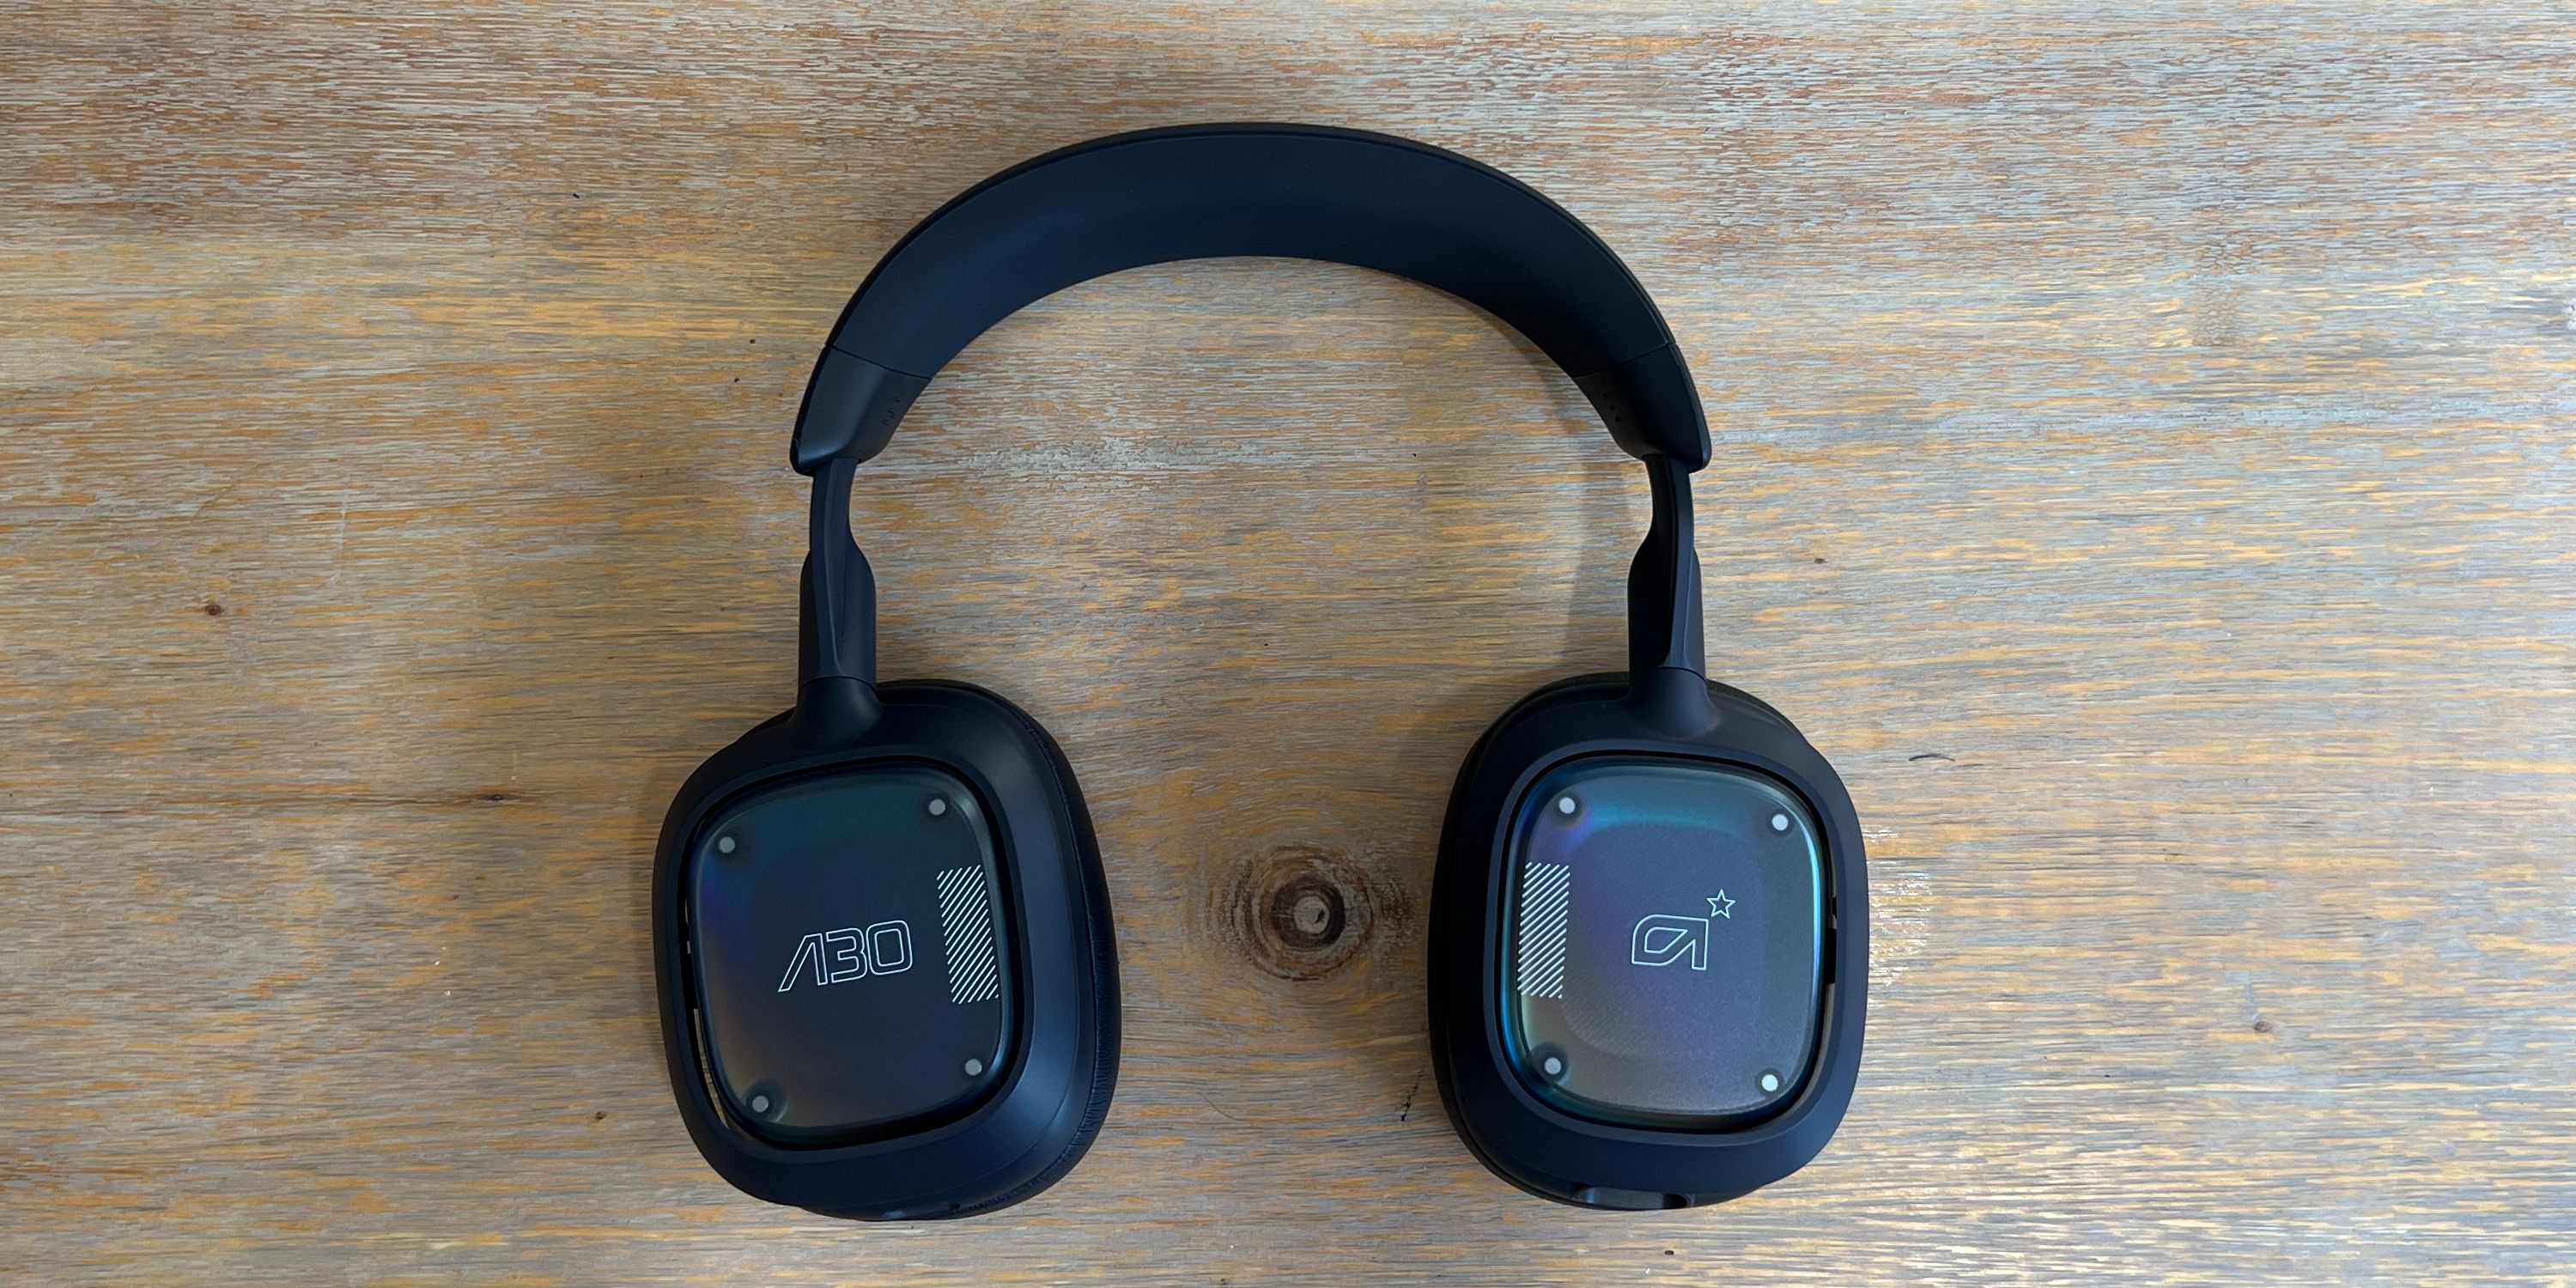 A30 astro gaming headset